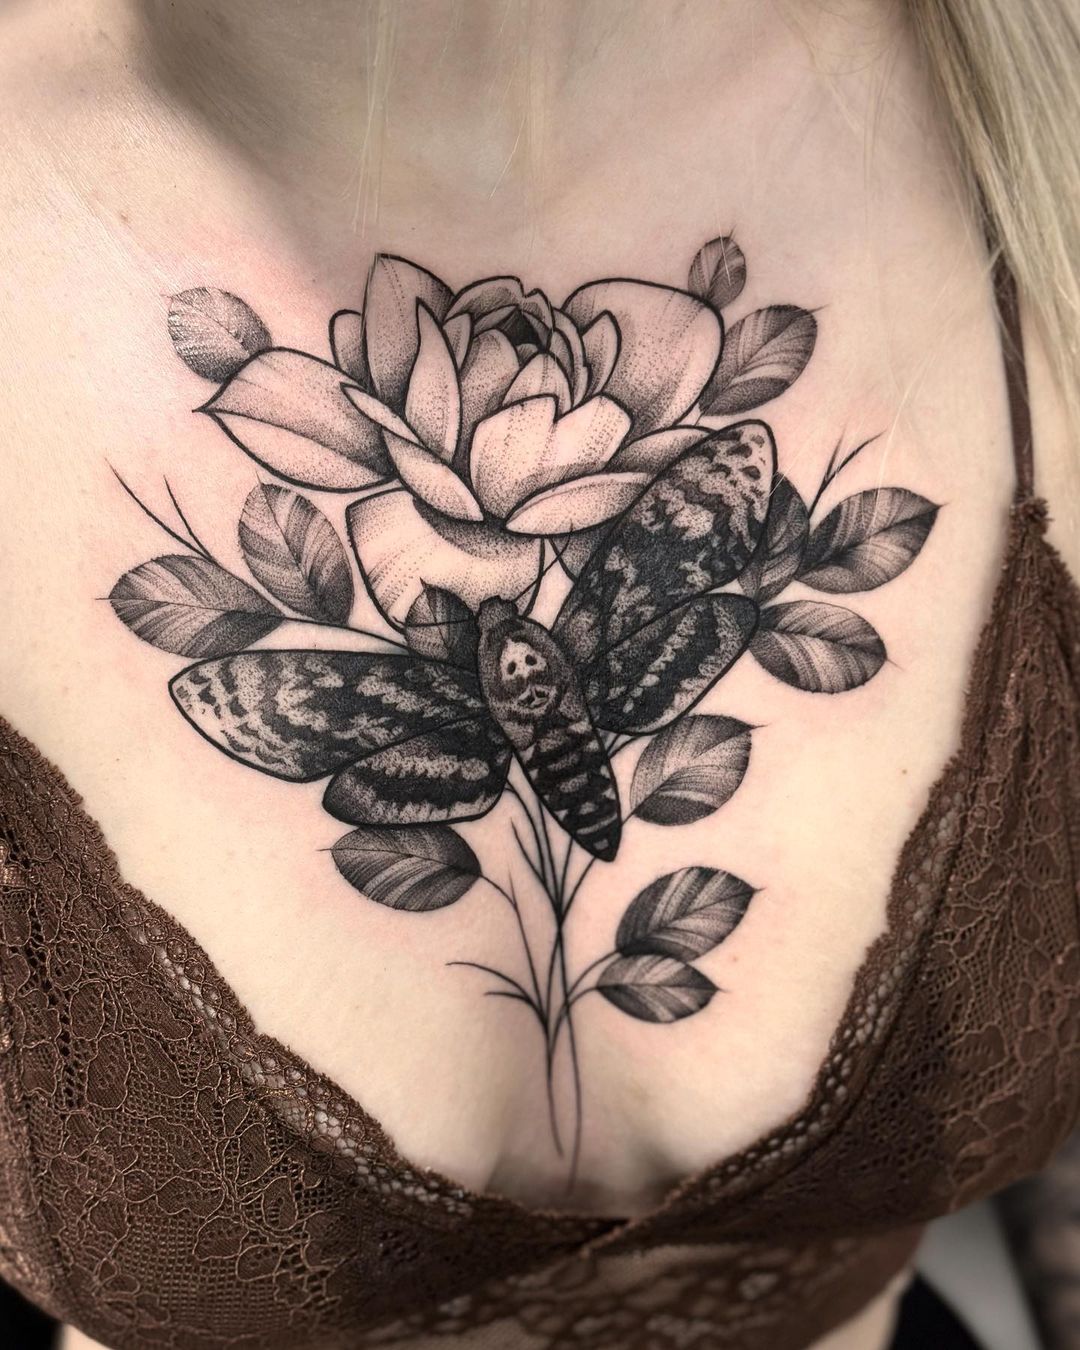 30+ Simple and Small Flower Tattoos Ideas for Women – MyBodiArt